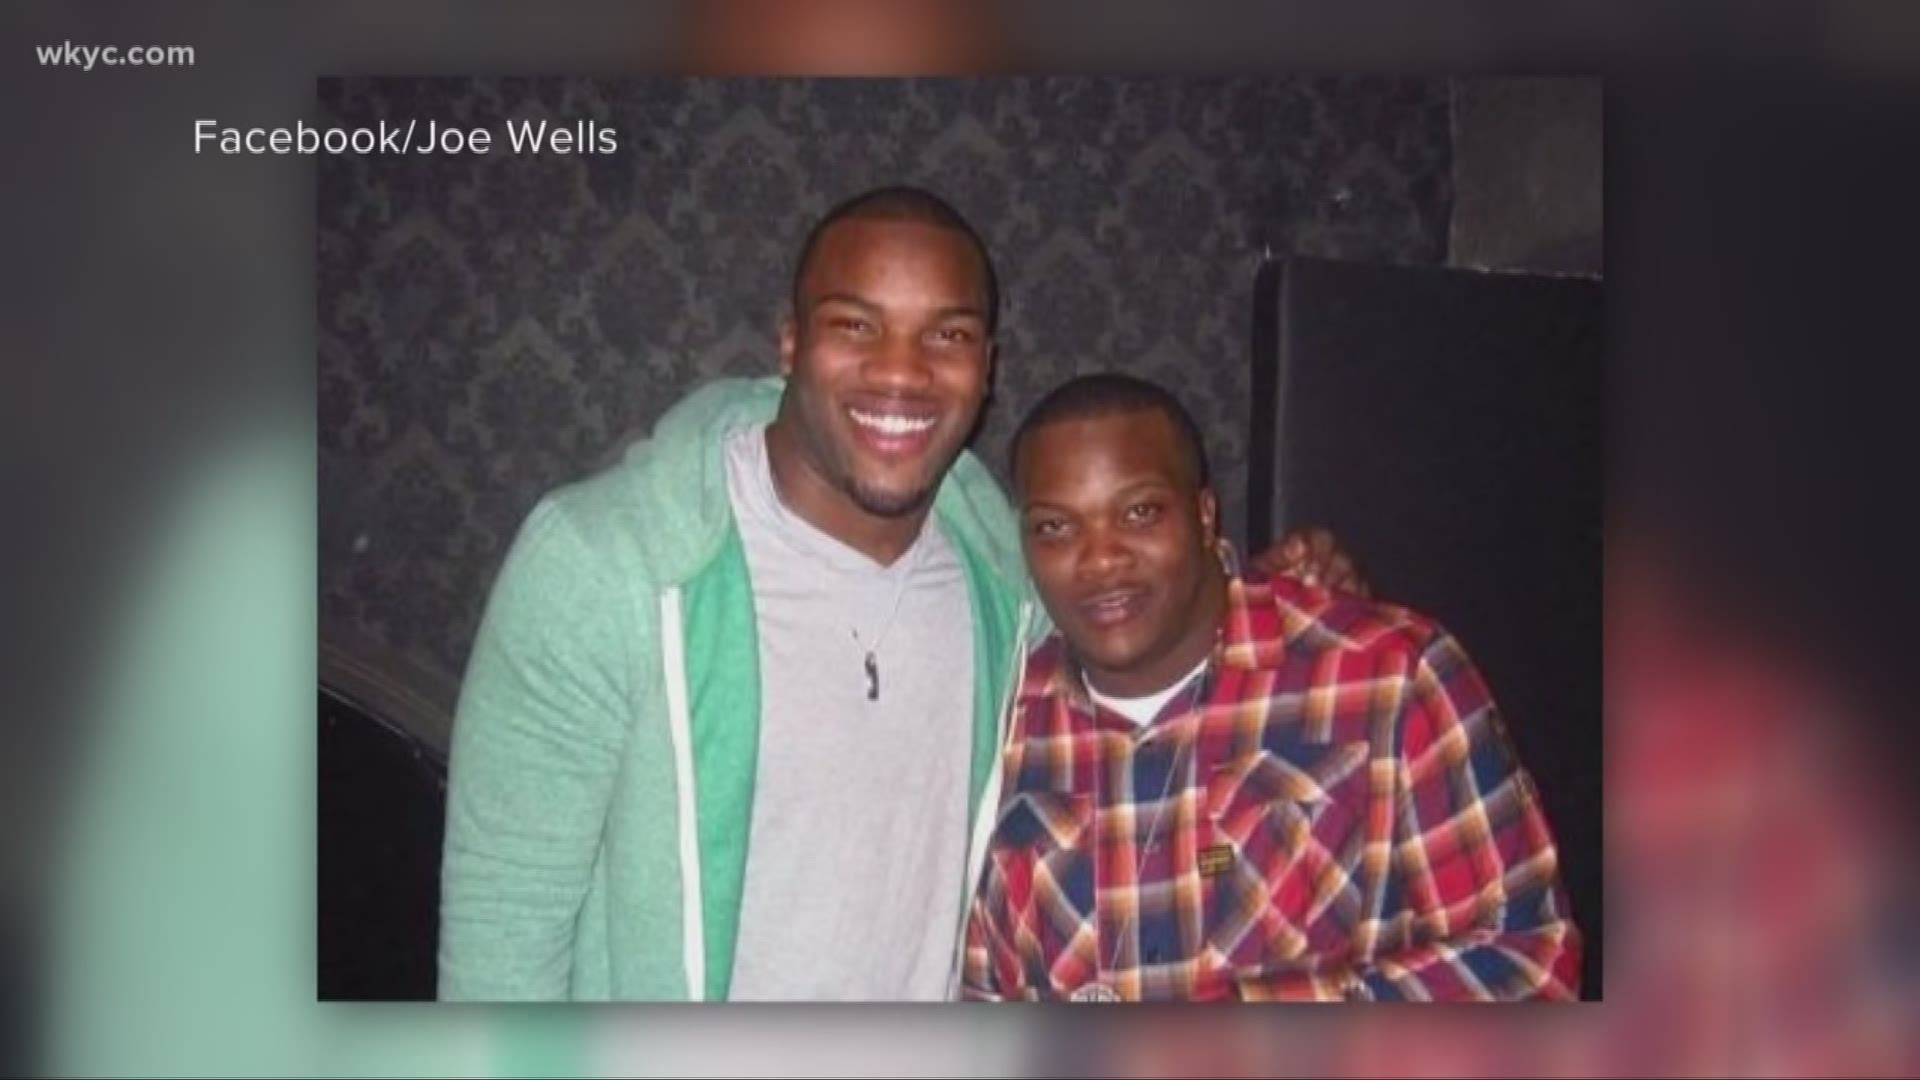 Joel "Joey" Wells is the older brother of Chris "Beanie" Wells, an Akron Garfield High School graduate who went on to become an All-Big Ten running back with the Ohio State football team.